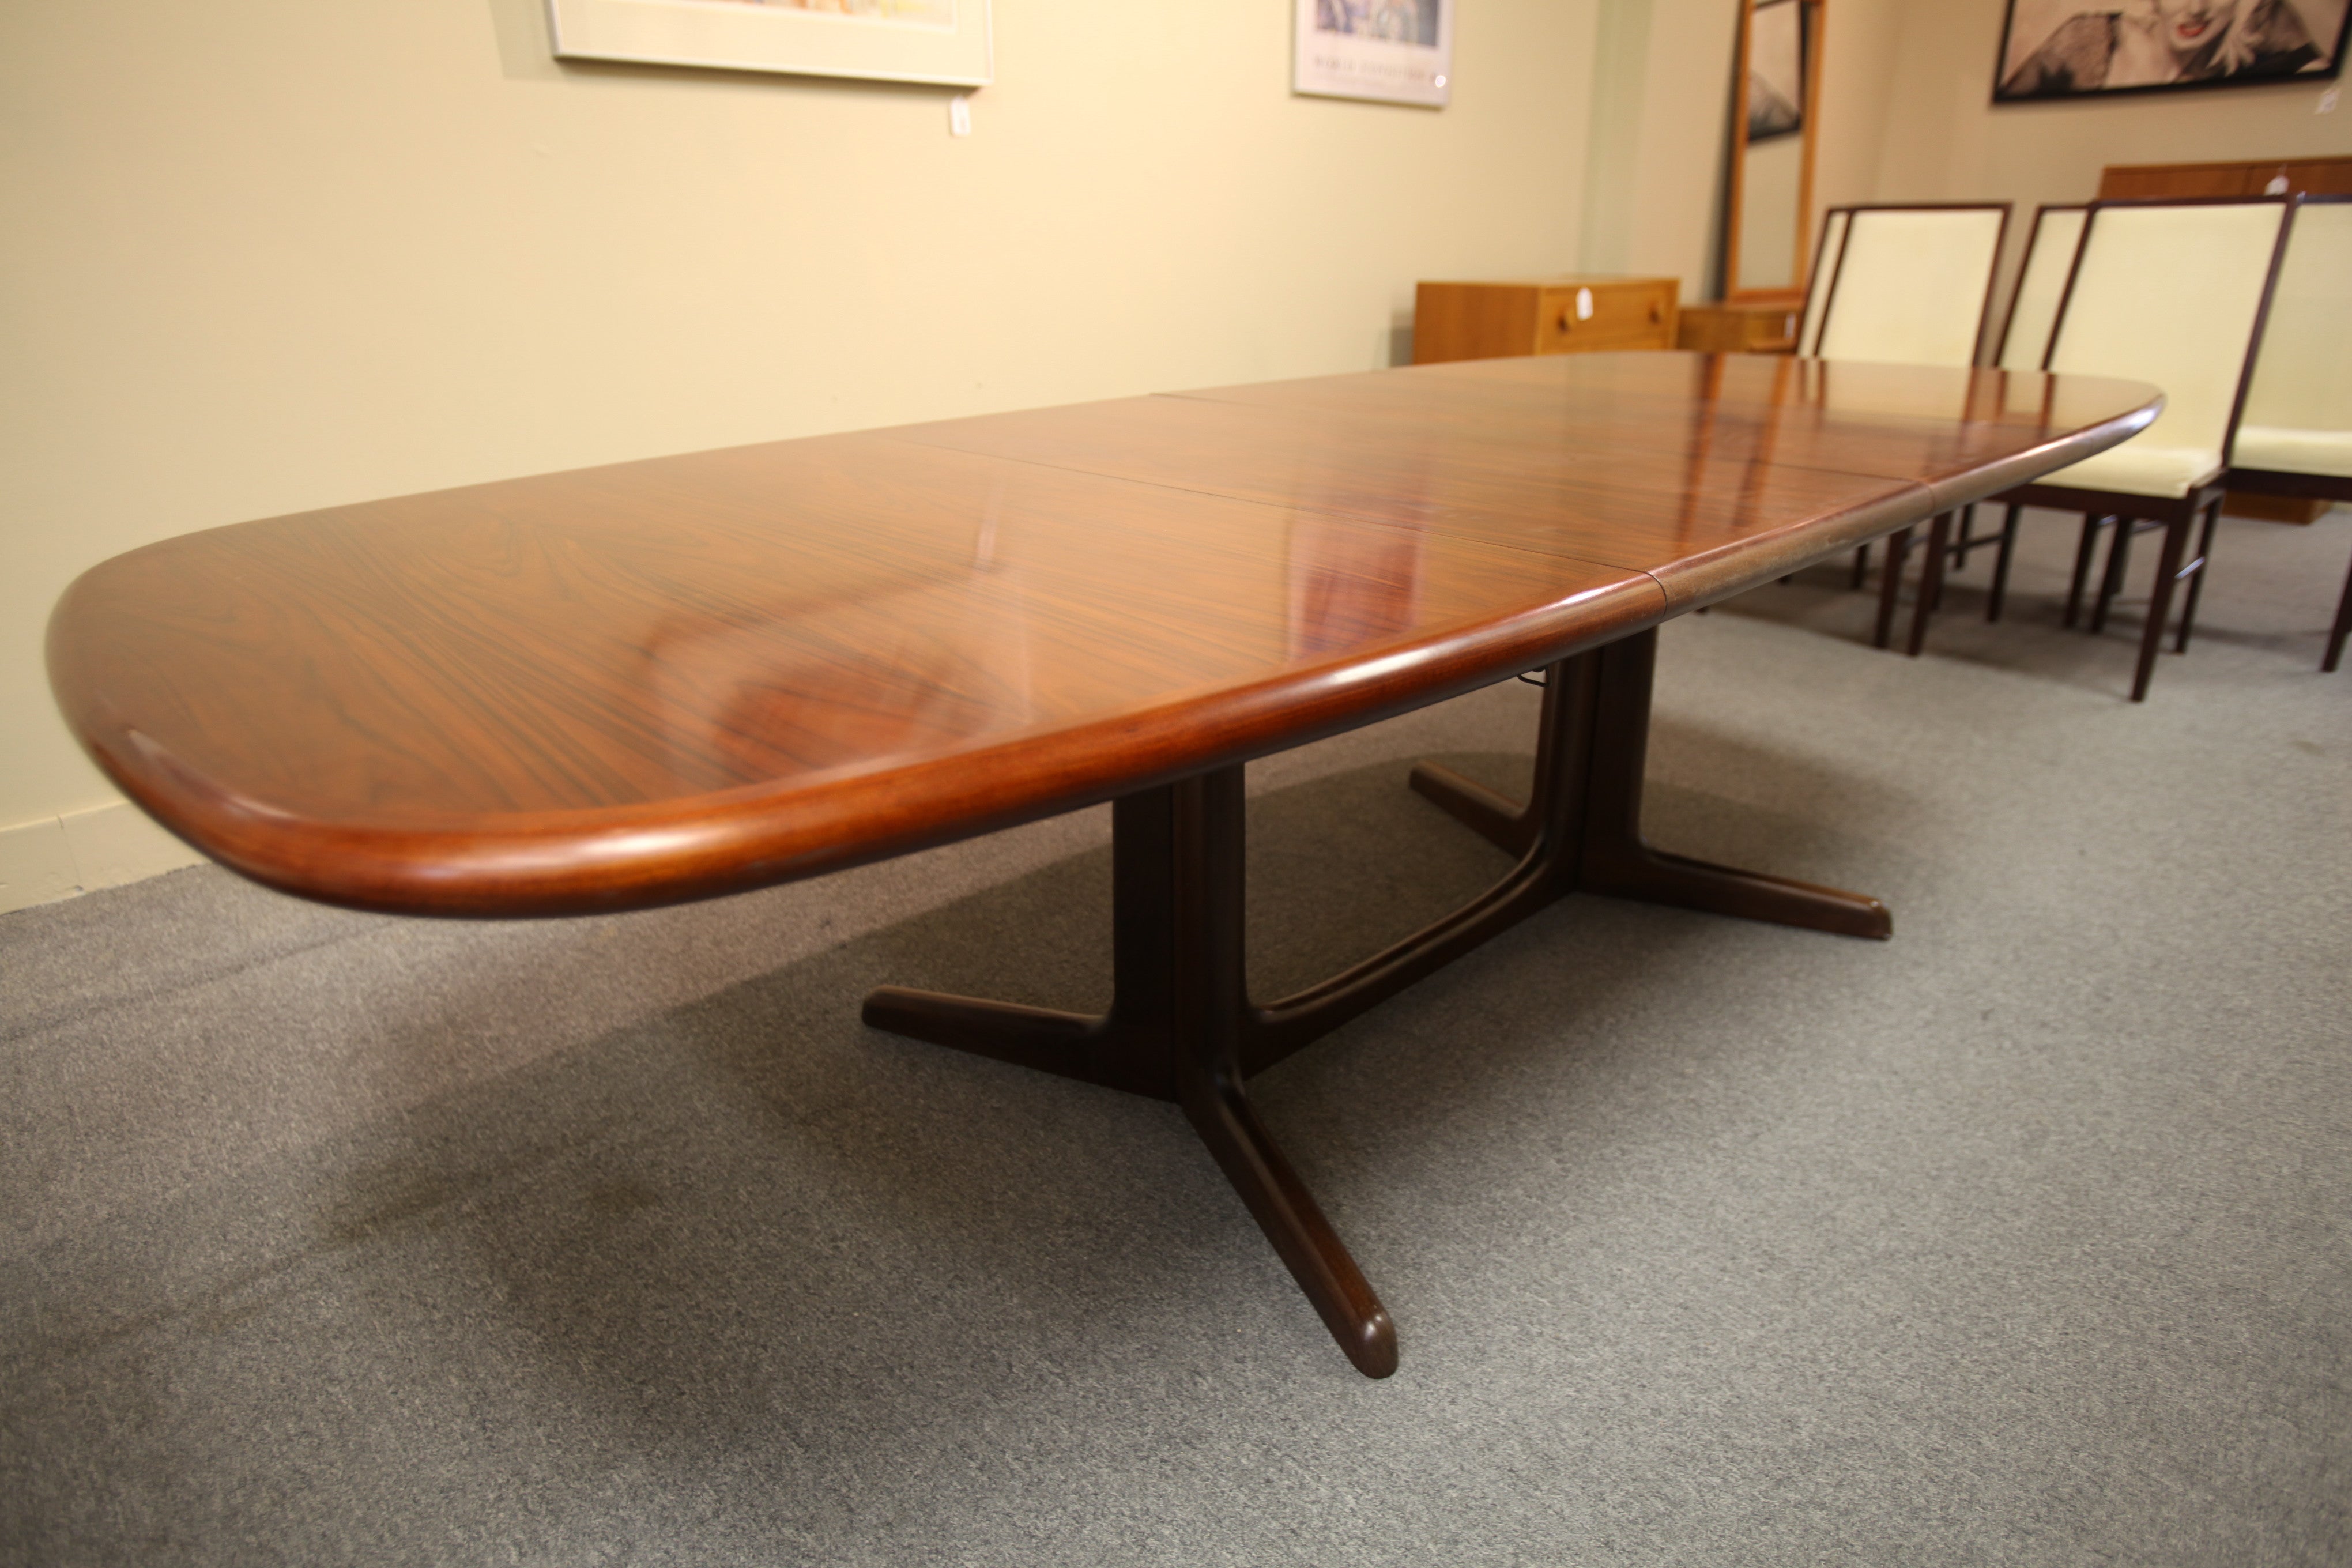 Danish Rosewood Dining Table (Gudme Mobelfabrik) 102"x41.5" with (2) leafs.